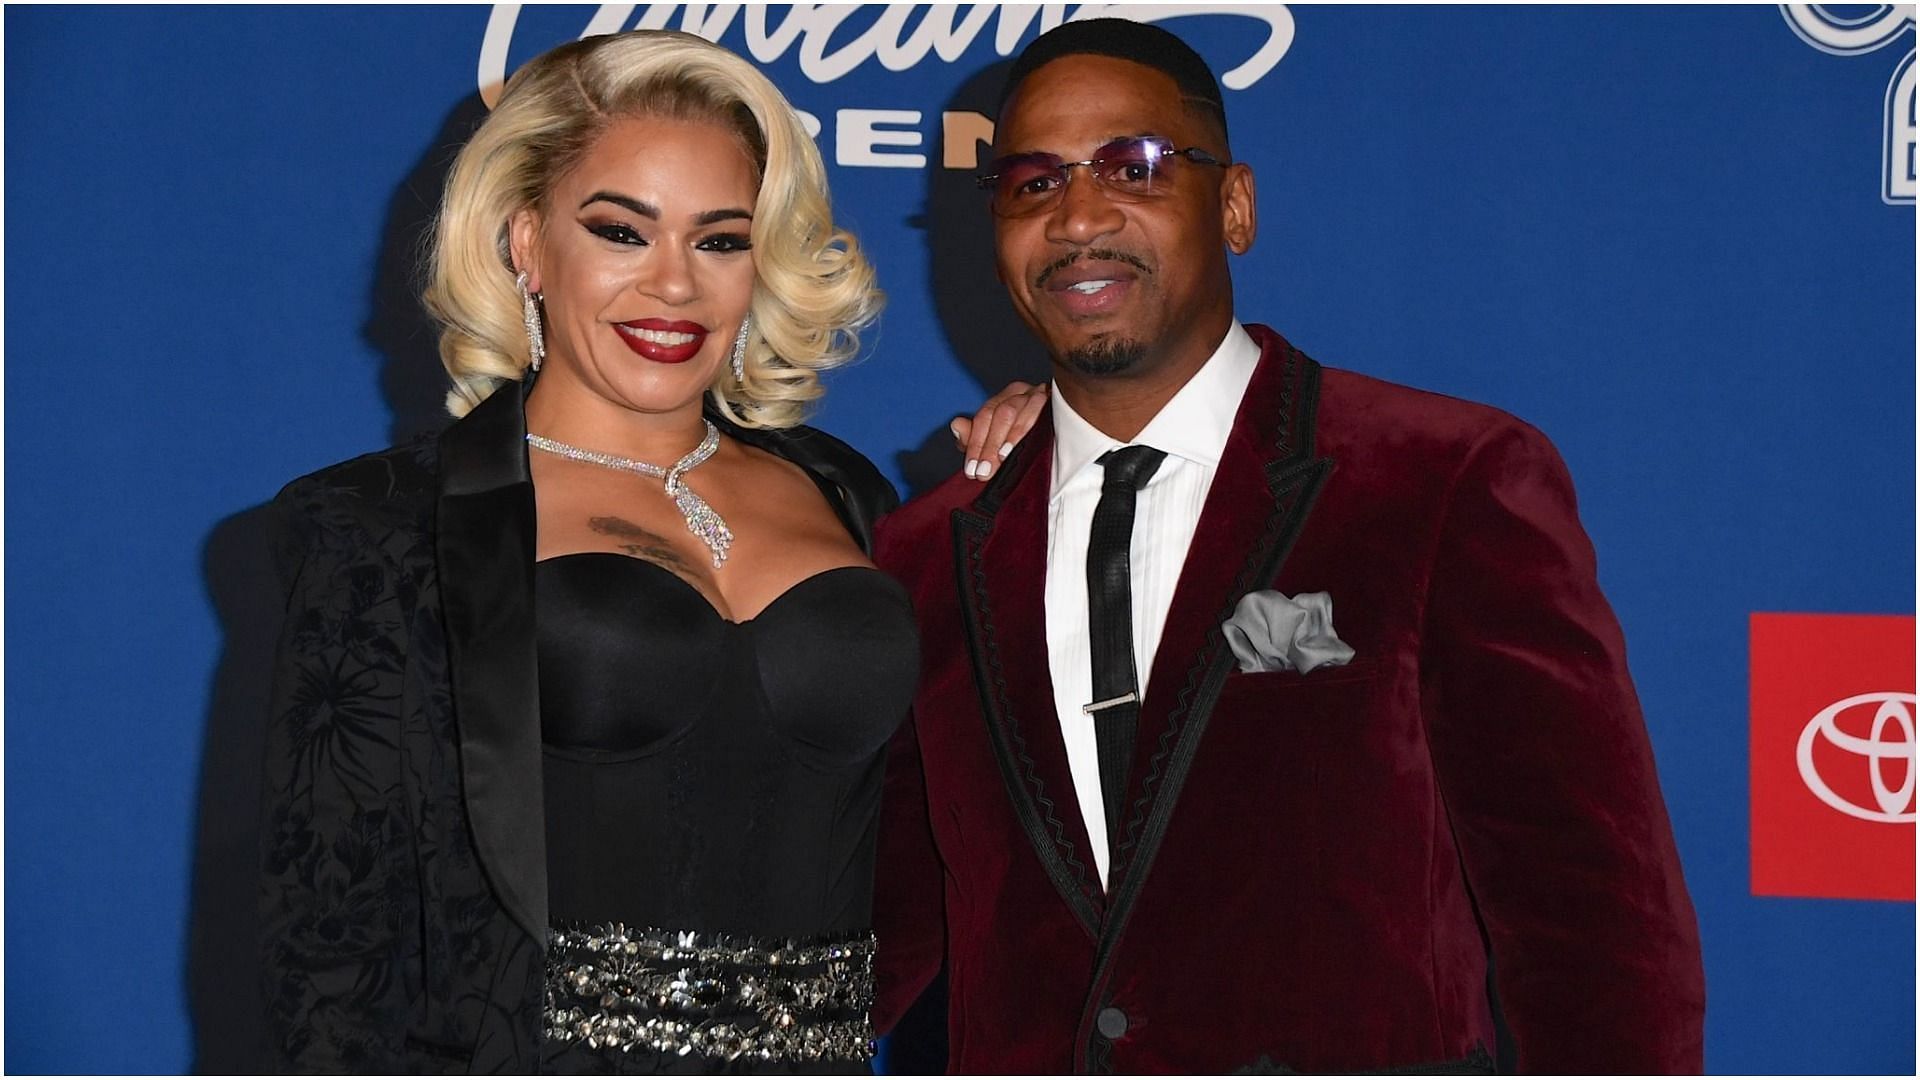 Faith Evans and Stevie J attend the 2018 Soul Train Awards at the Orleans Arena (Image by Mindy Small via Getty Images)